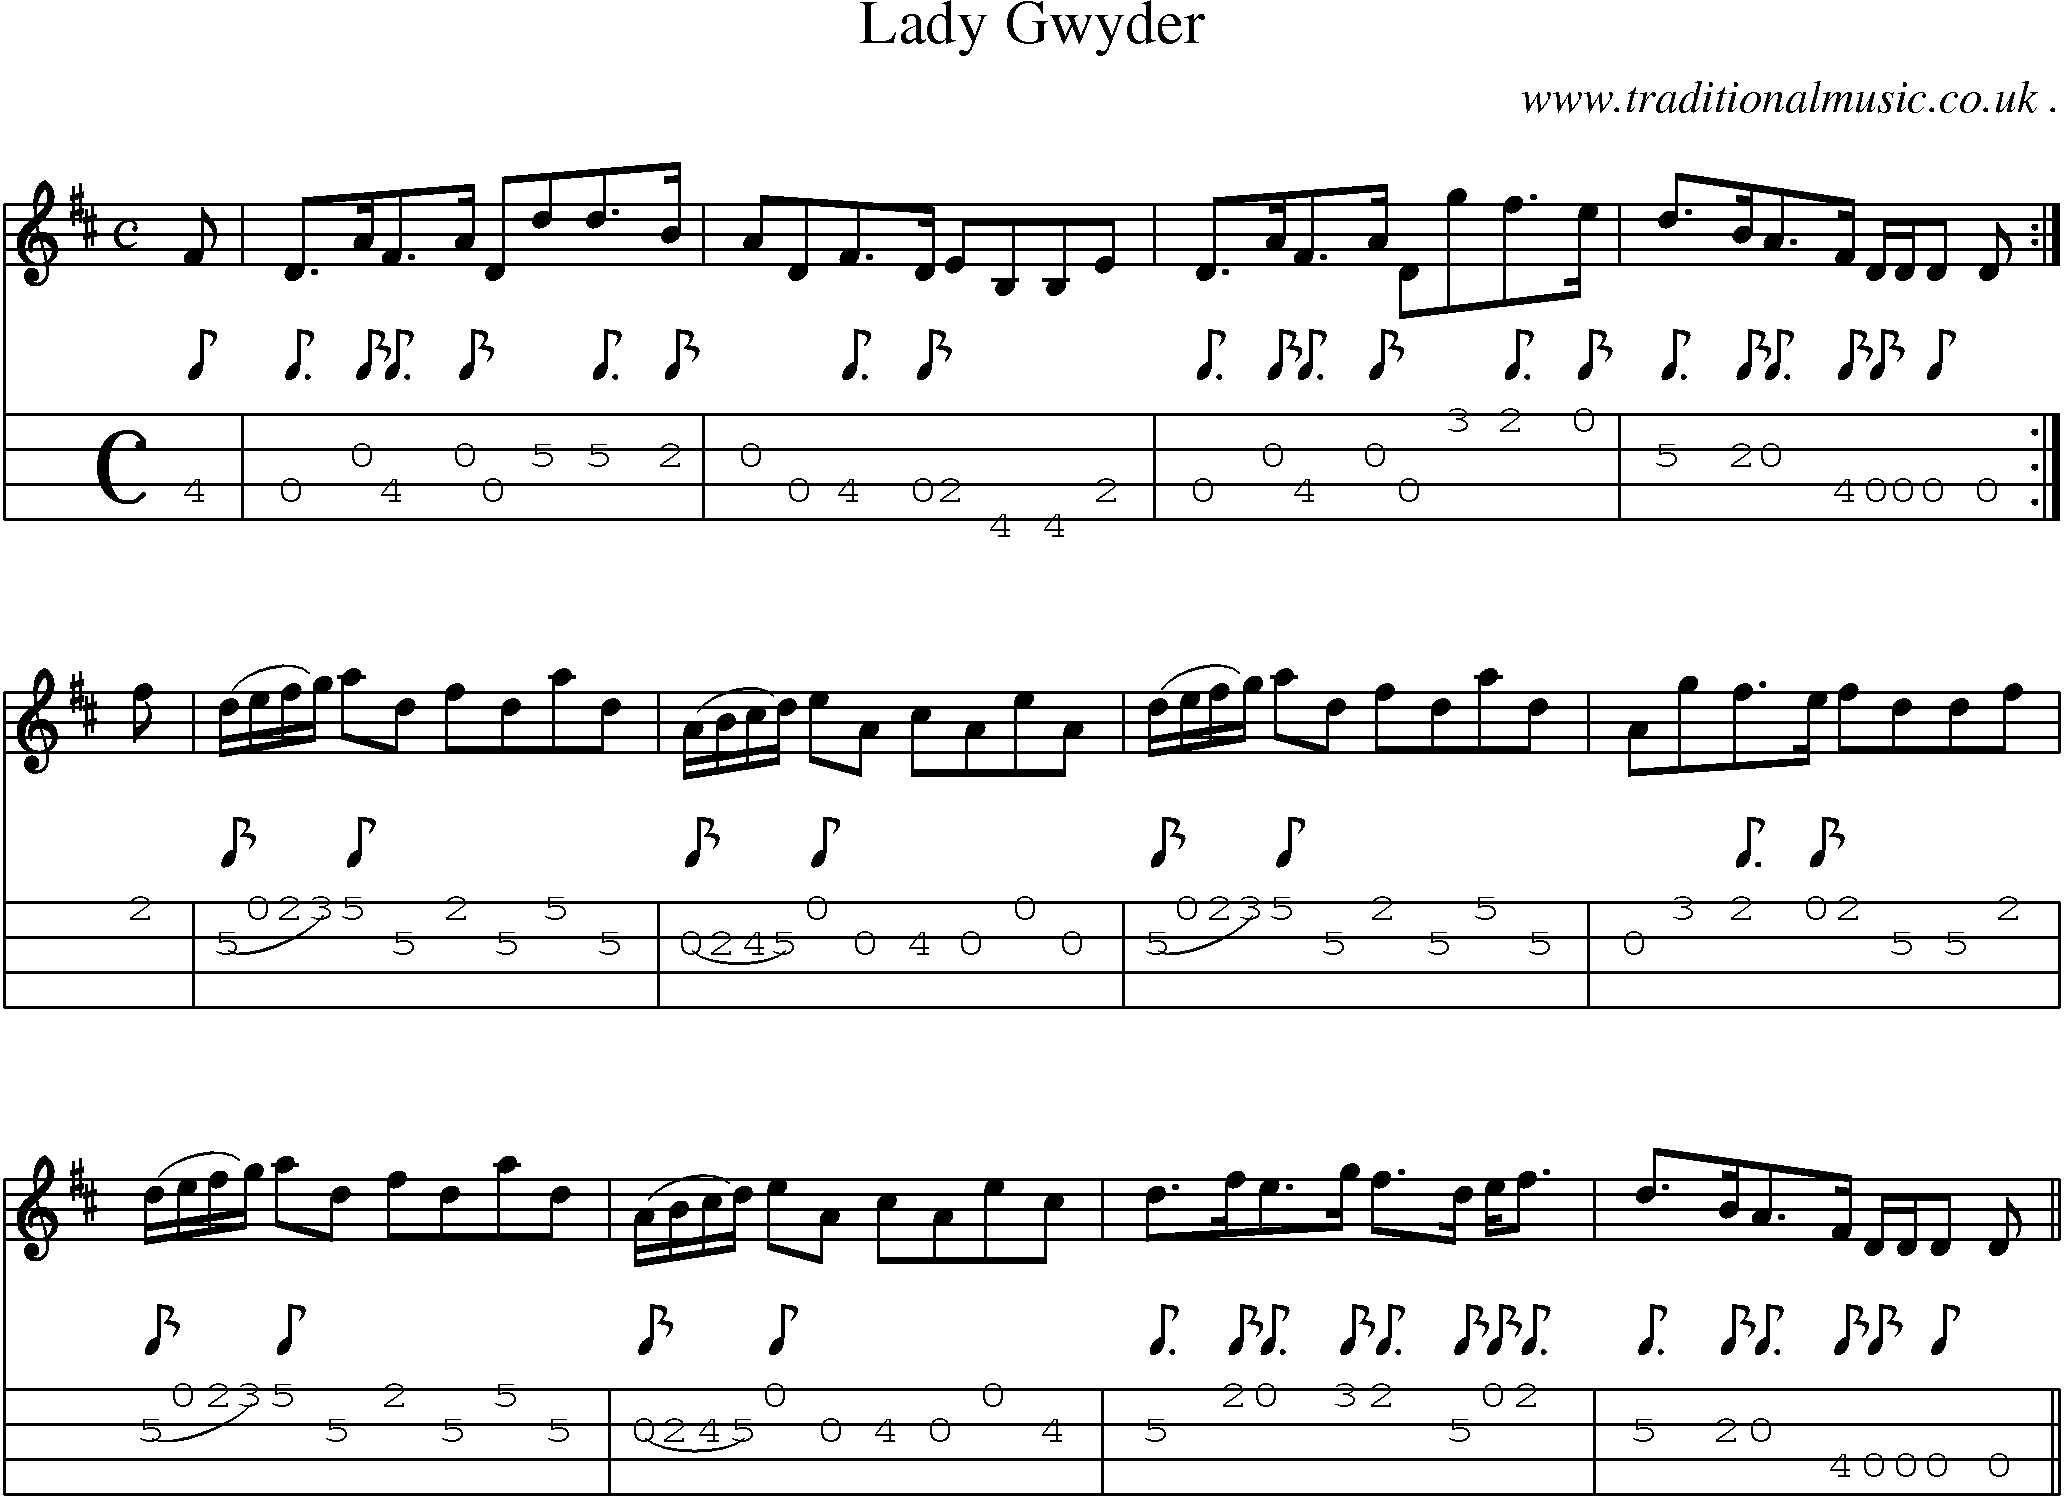 Sheet-music  score, Chords and Mandolin Tabs for Lady Gwyder